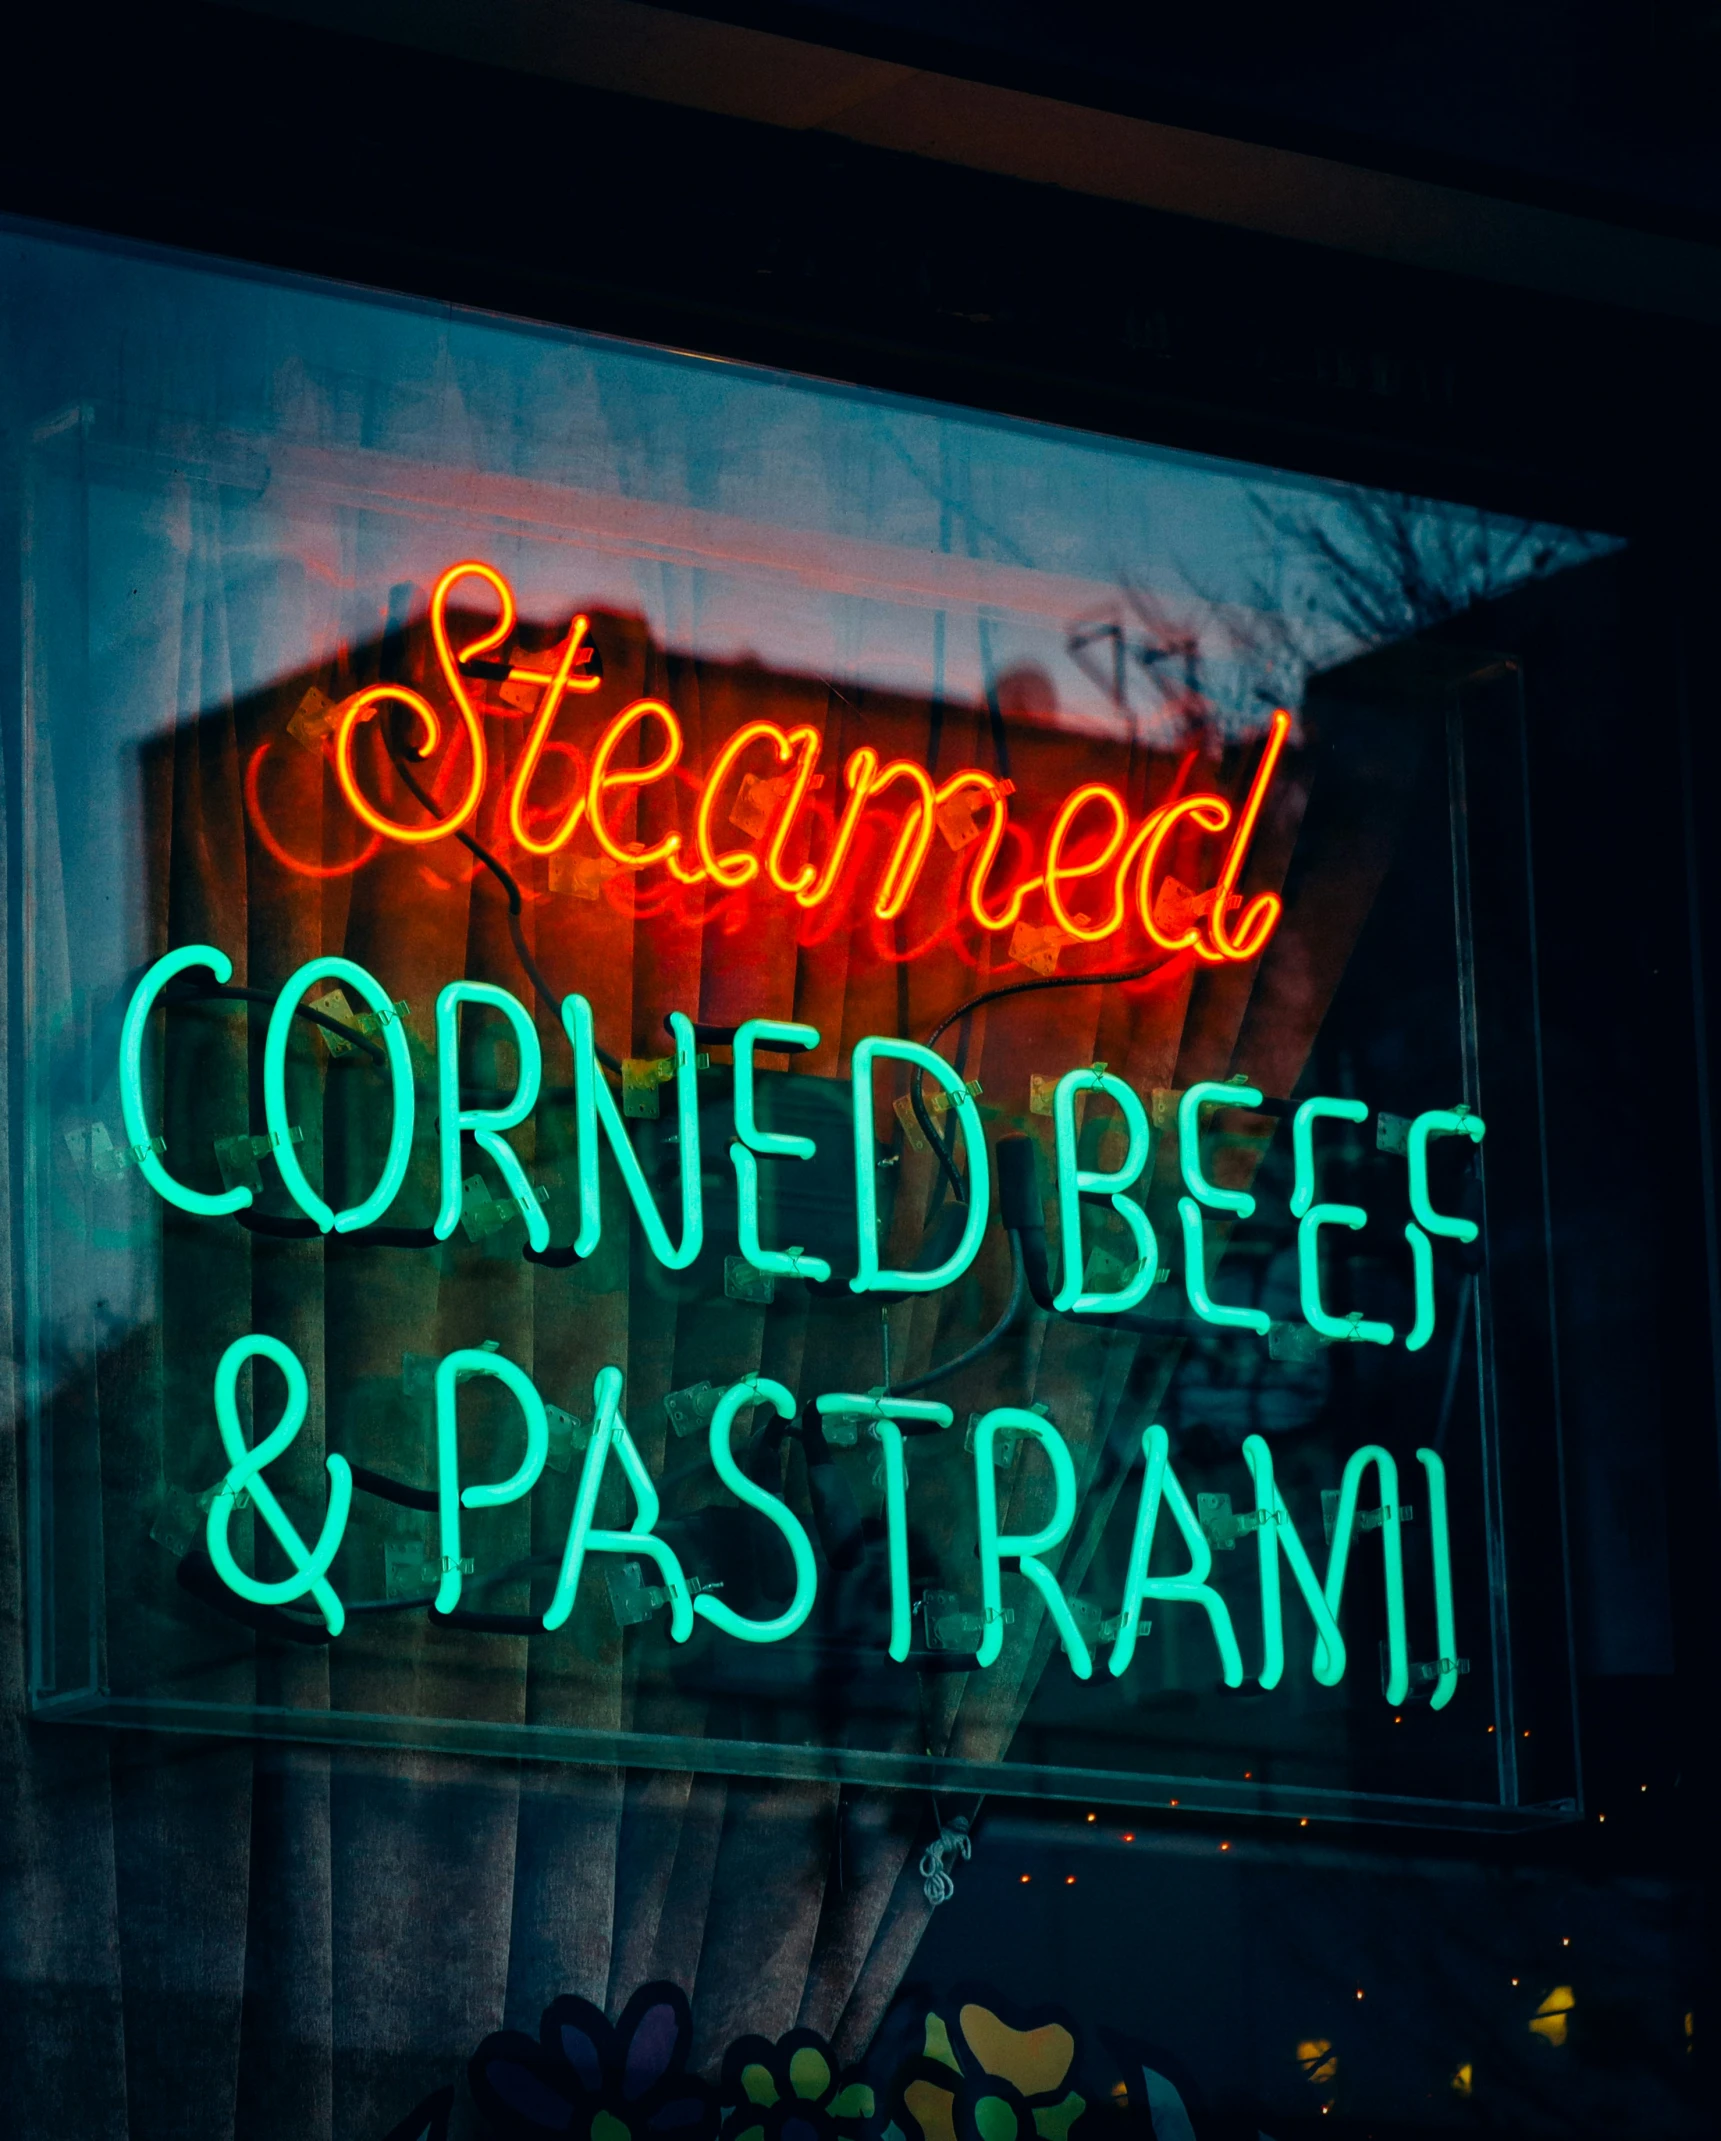 a neon sign reading steamed corned beef and pasta